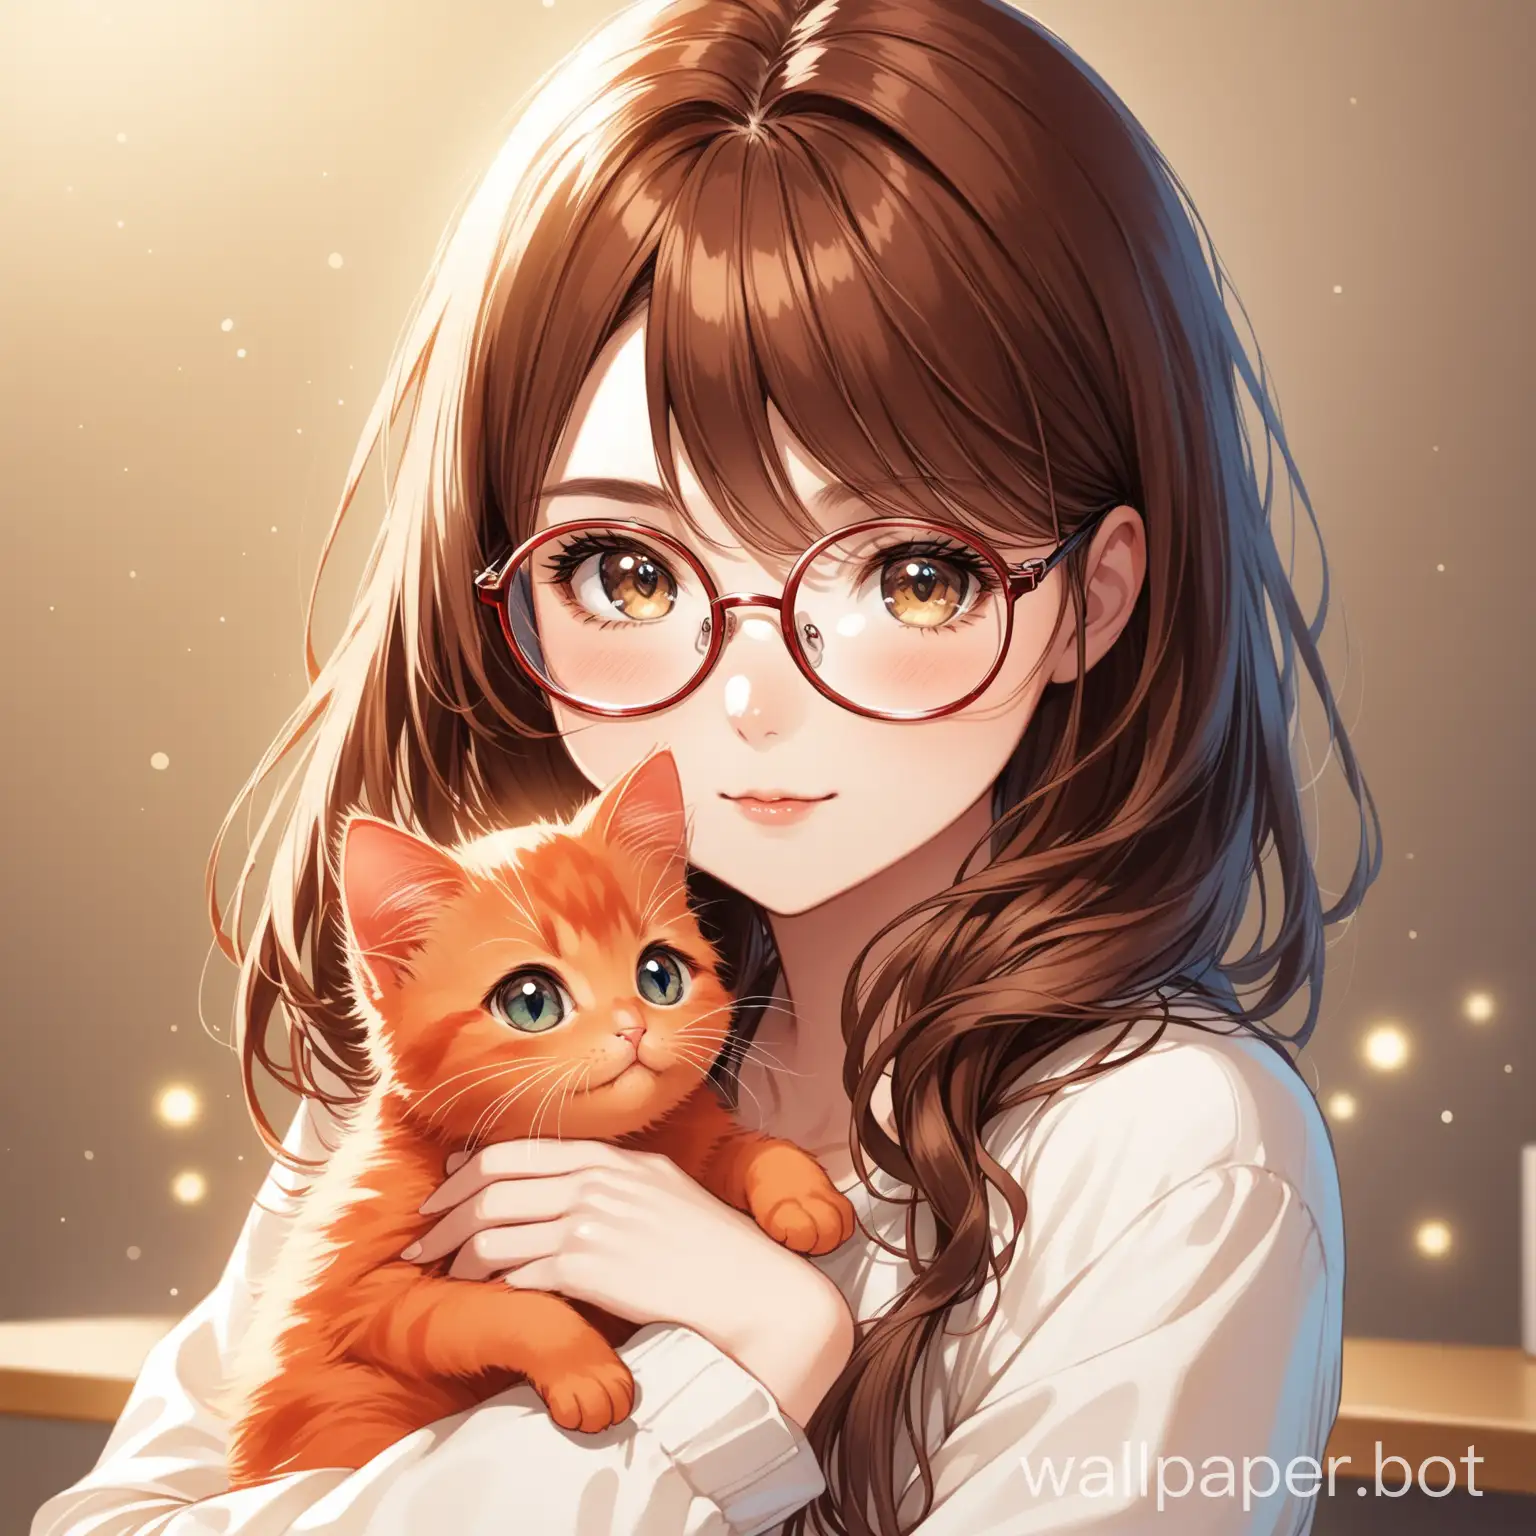 Young-Girl-with-Brown-Hair-and-Glasses-Holding-a-Red-Kitten